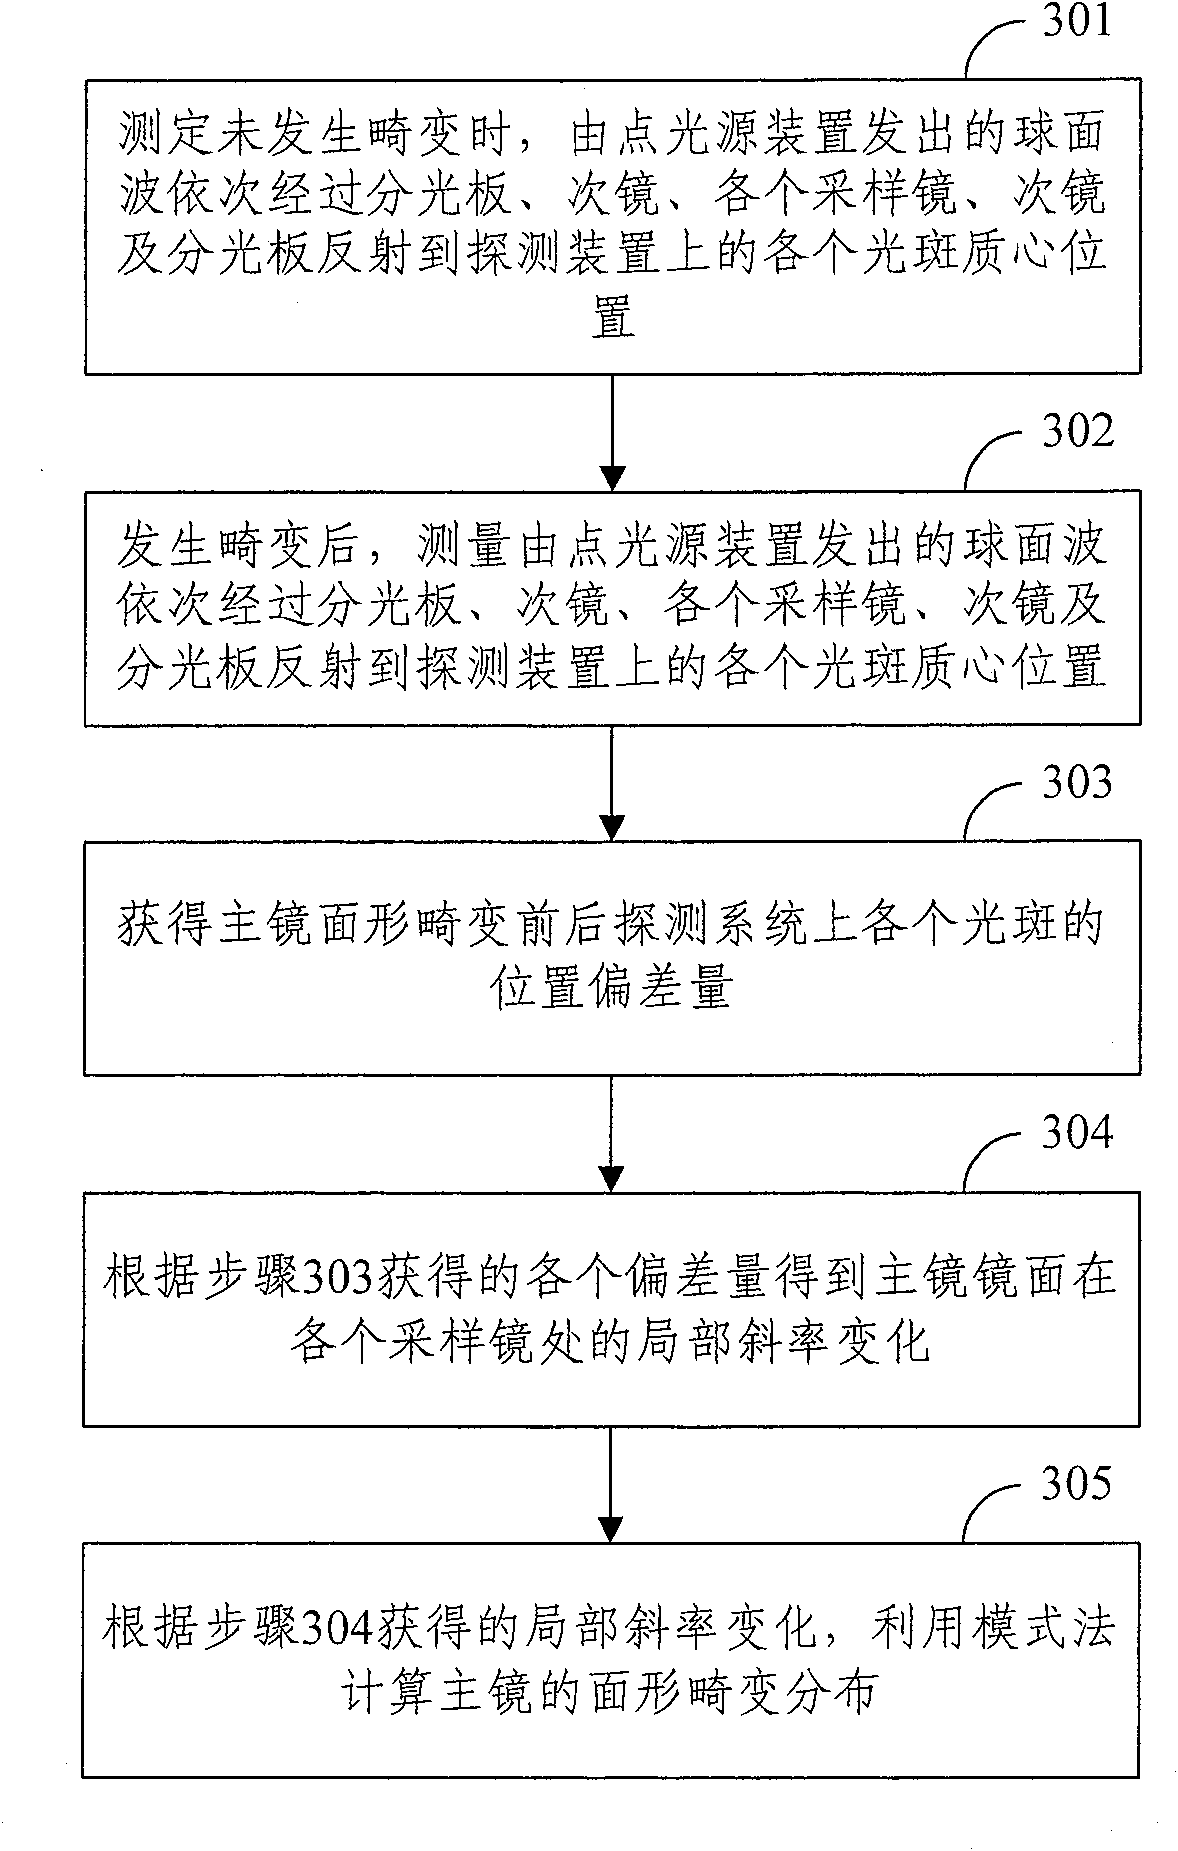 Main mirror face deformation detecting method and system for space reflection type optical remote sensor